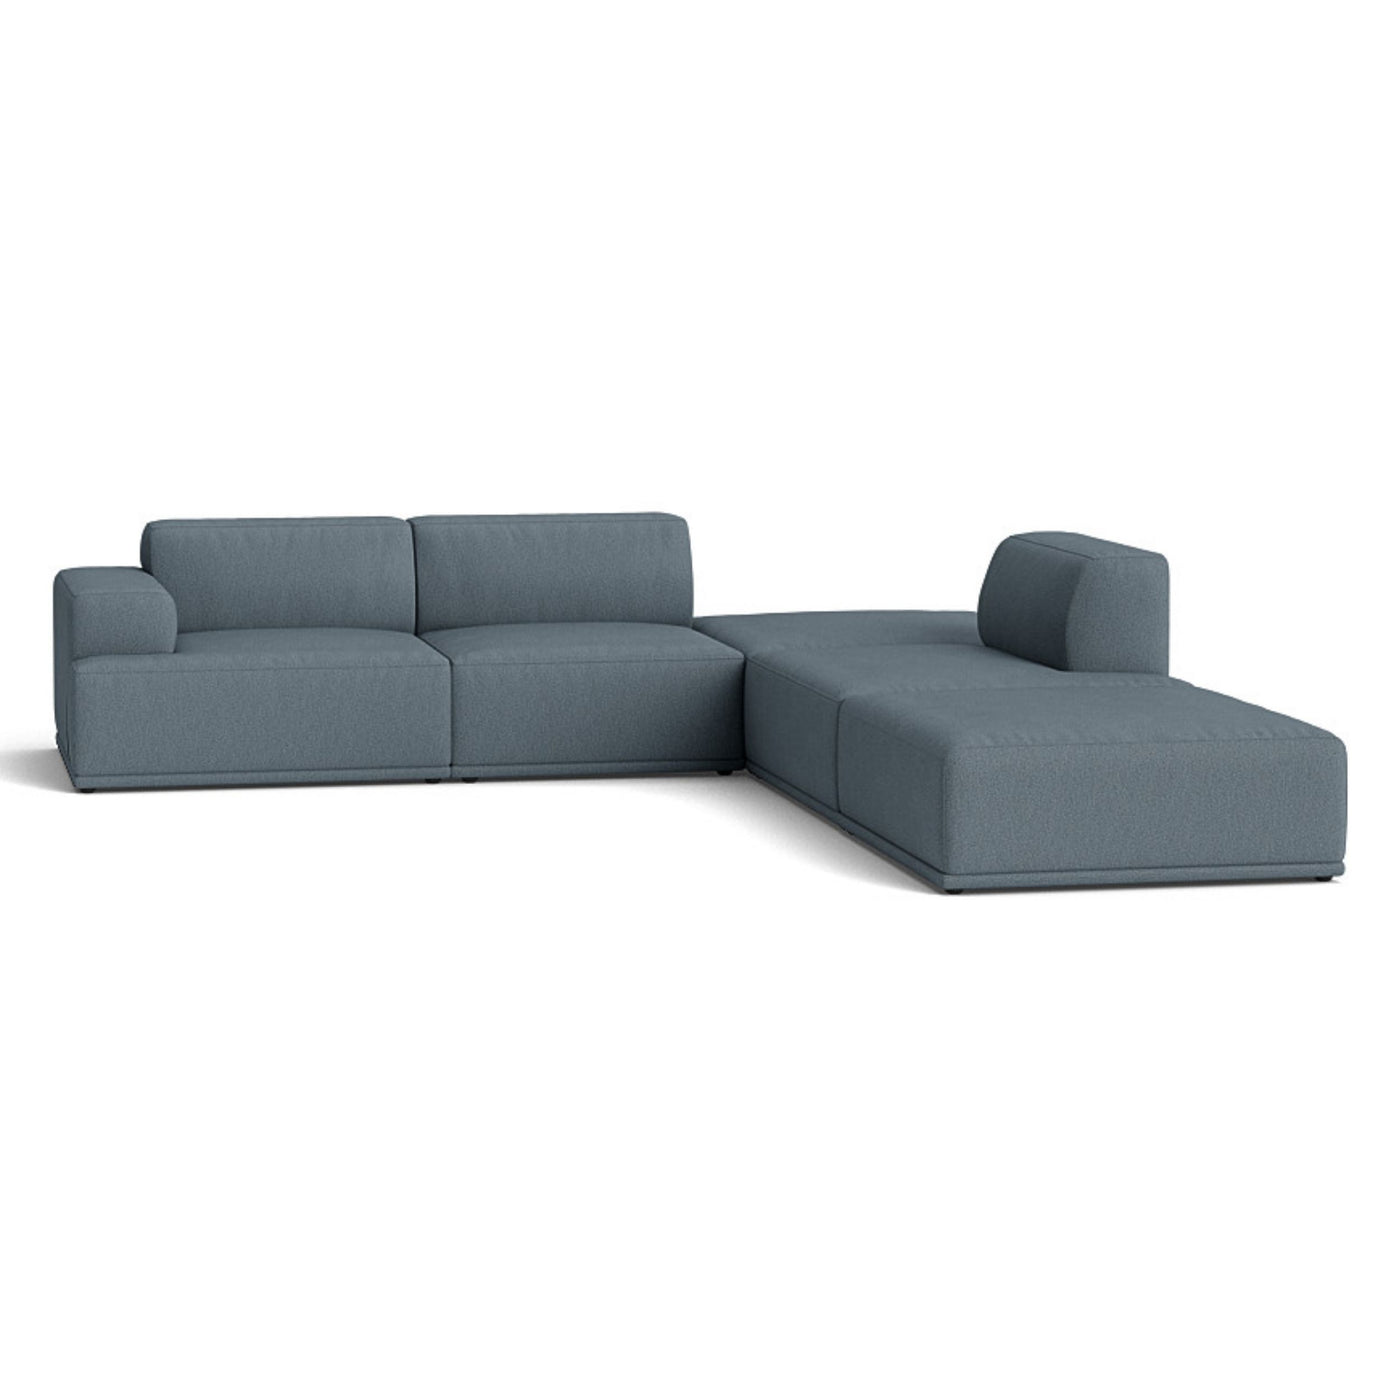 Muuto Connect Soft Modular Corner Sofa, configuration 3. made-to-order from someday designs. #colour_clay-1-blue